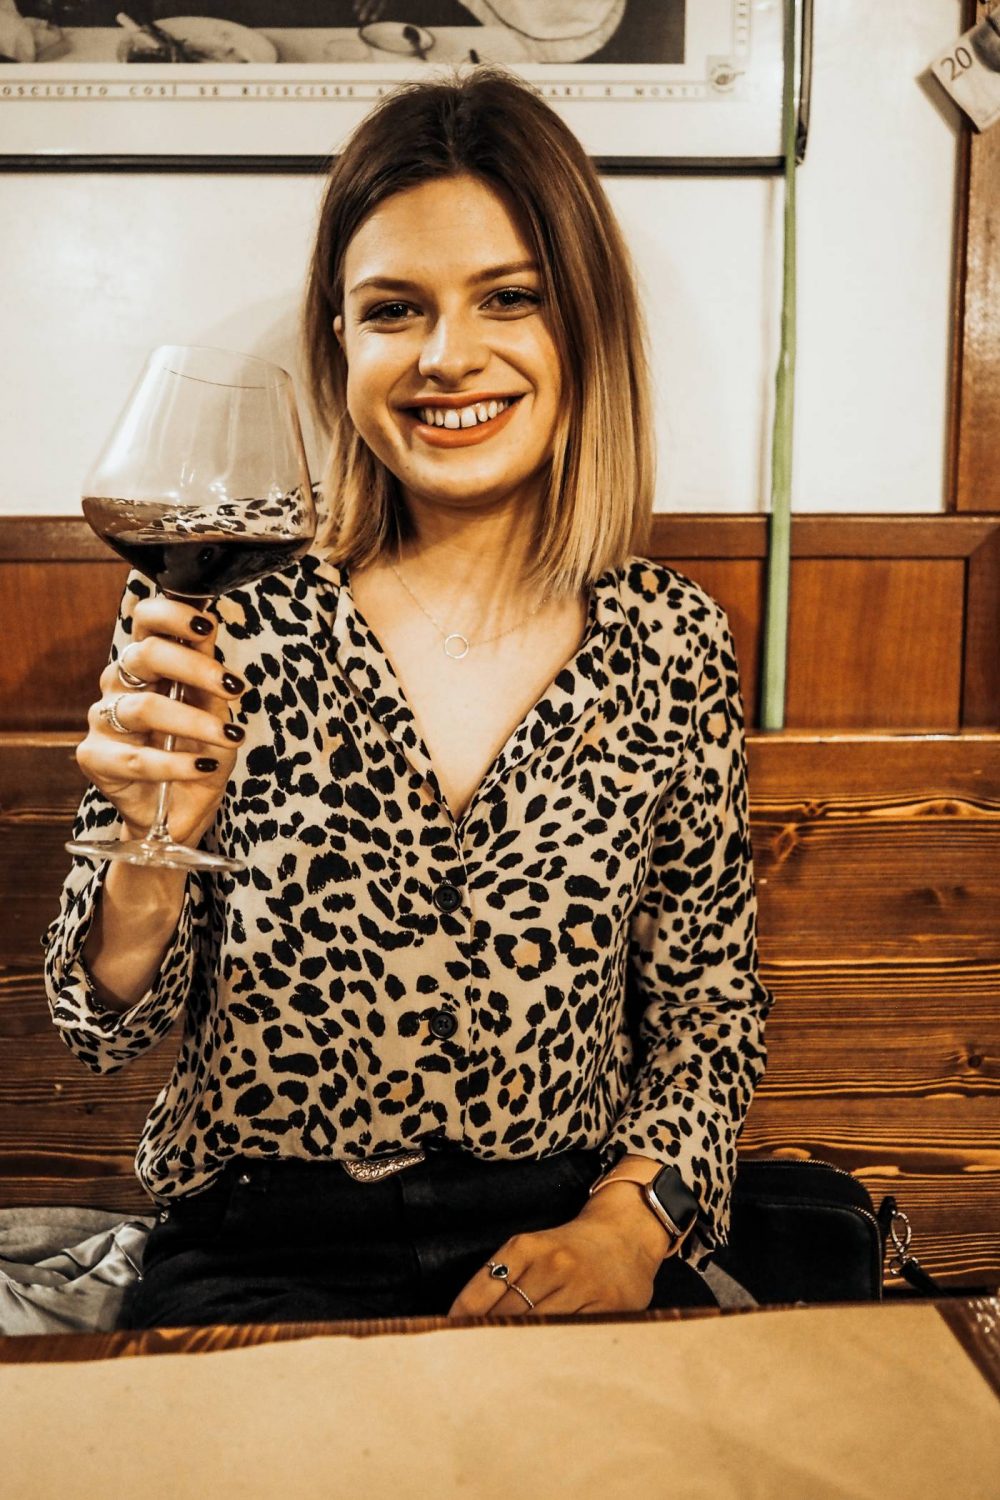 Sophie holding a glass of wine